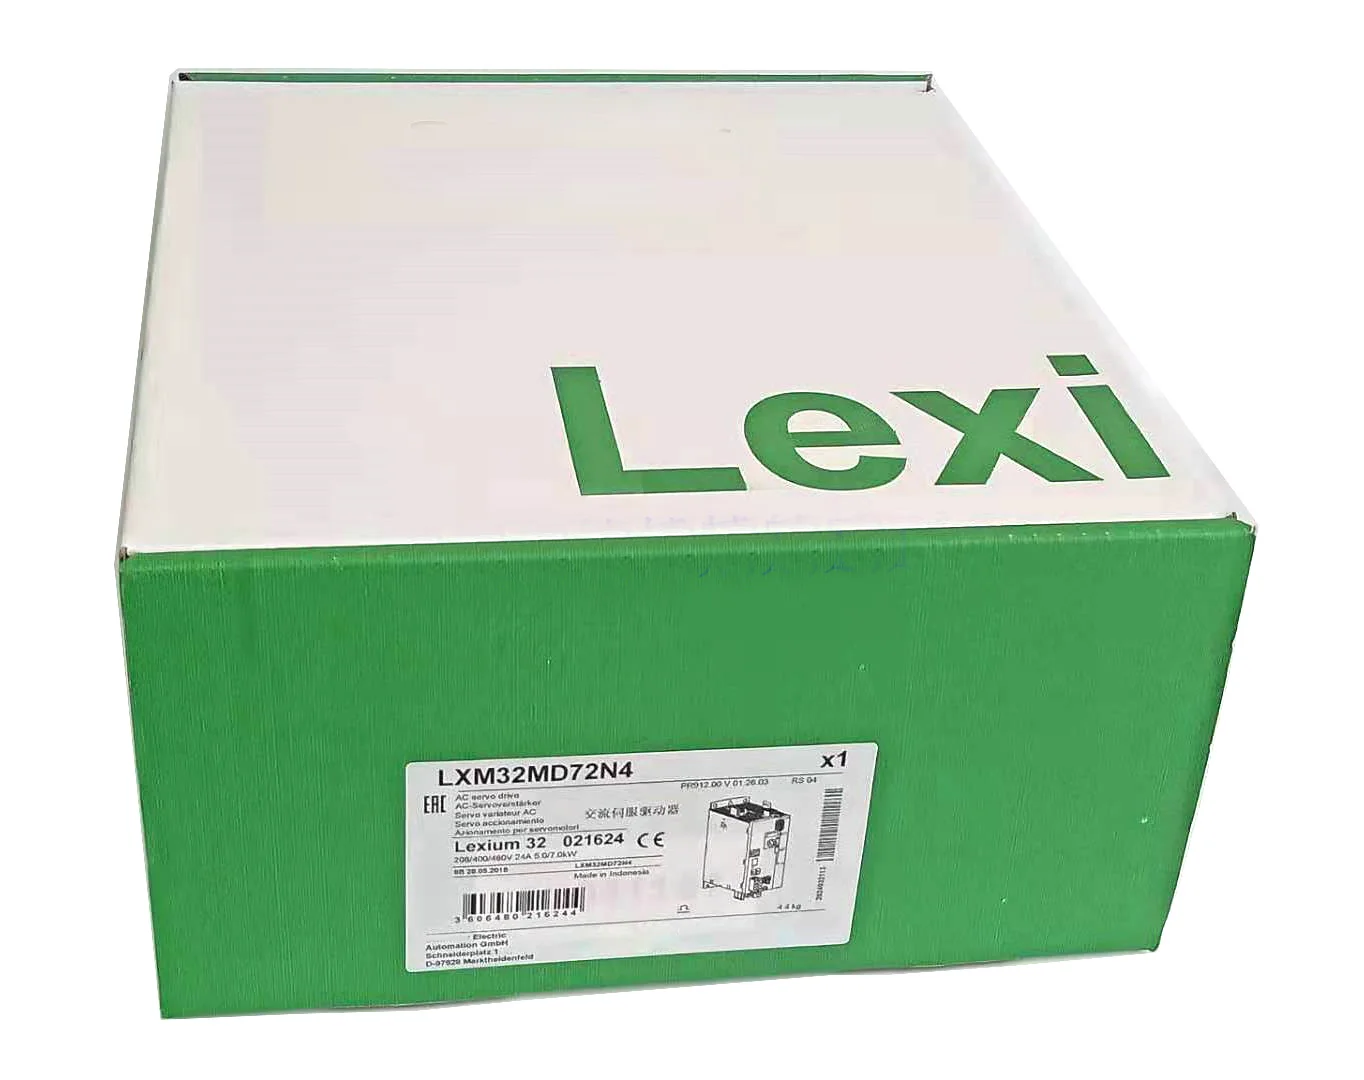 

New Original In BOX LXM32MD72N4 {Warehouse stock} 1 Year Warranty Shipment within 24 hours